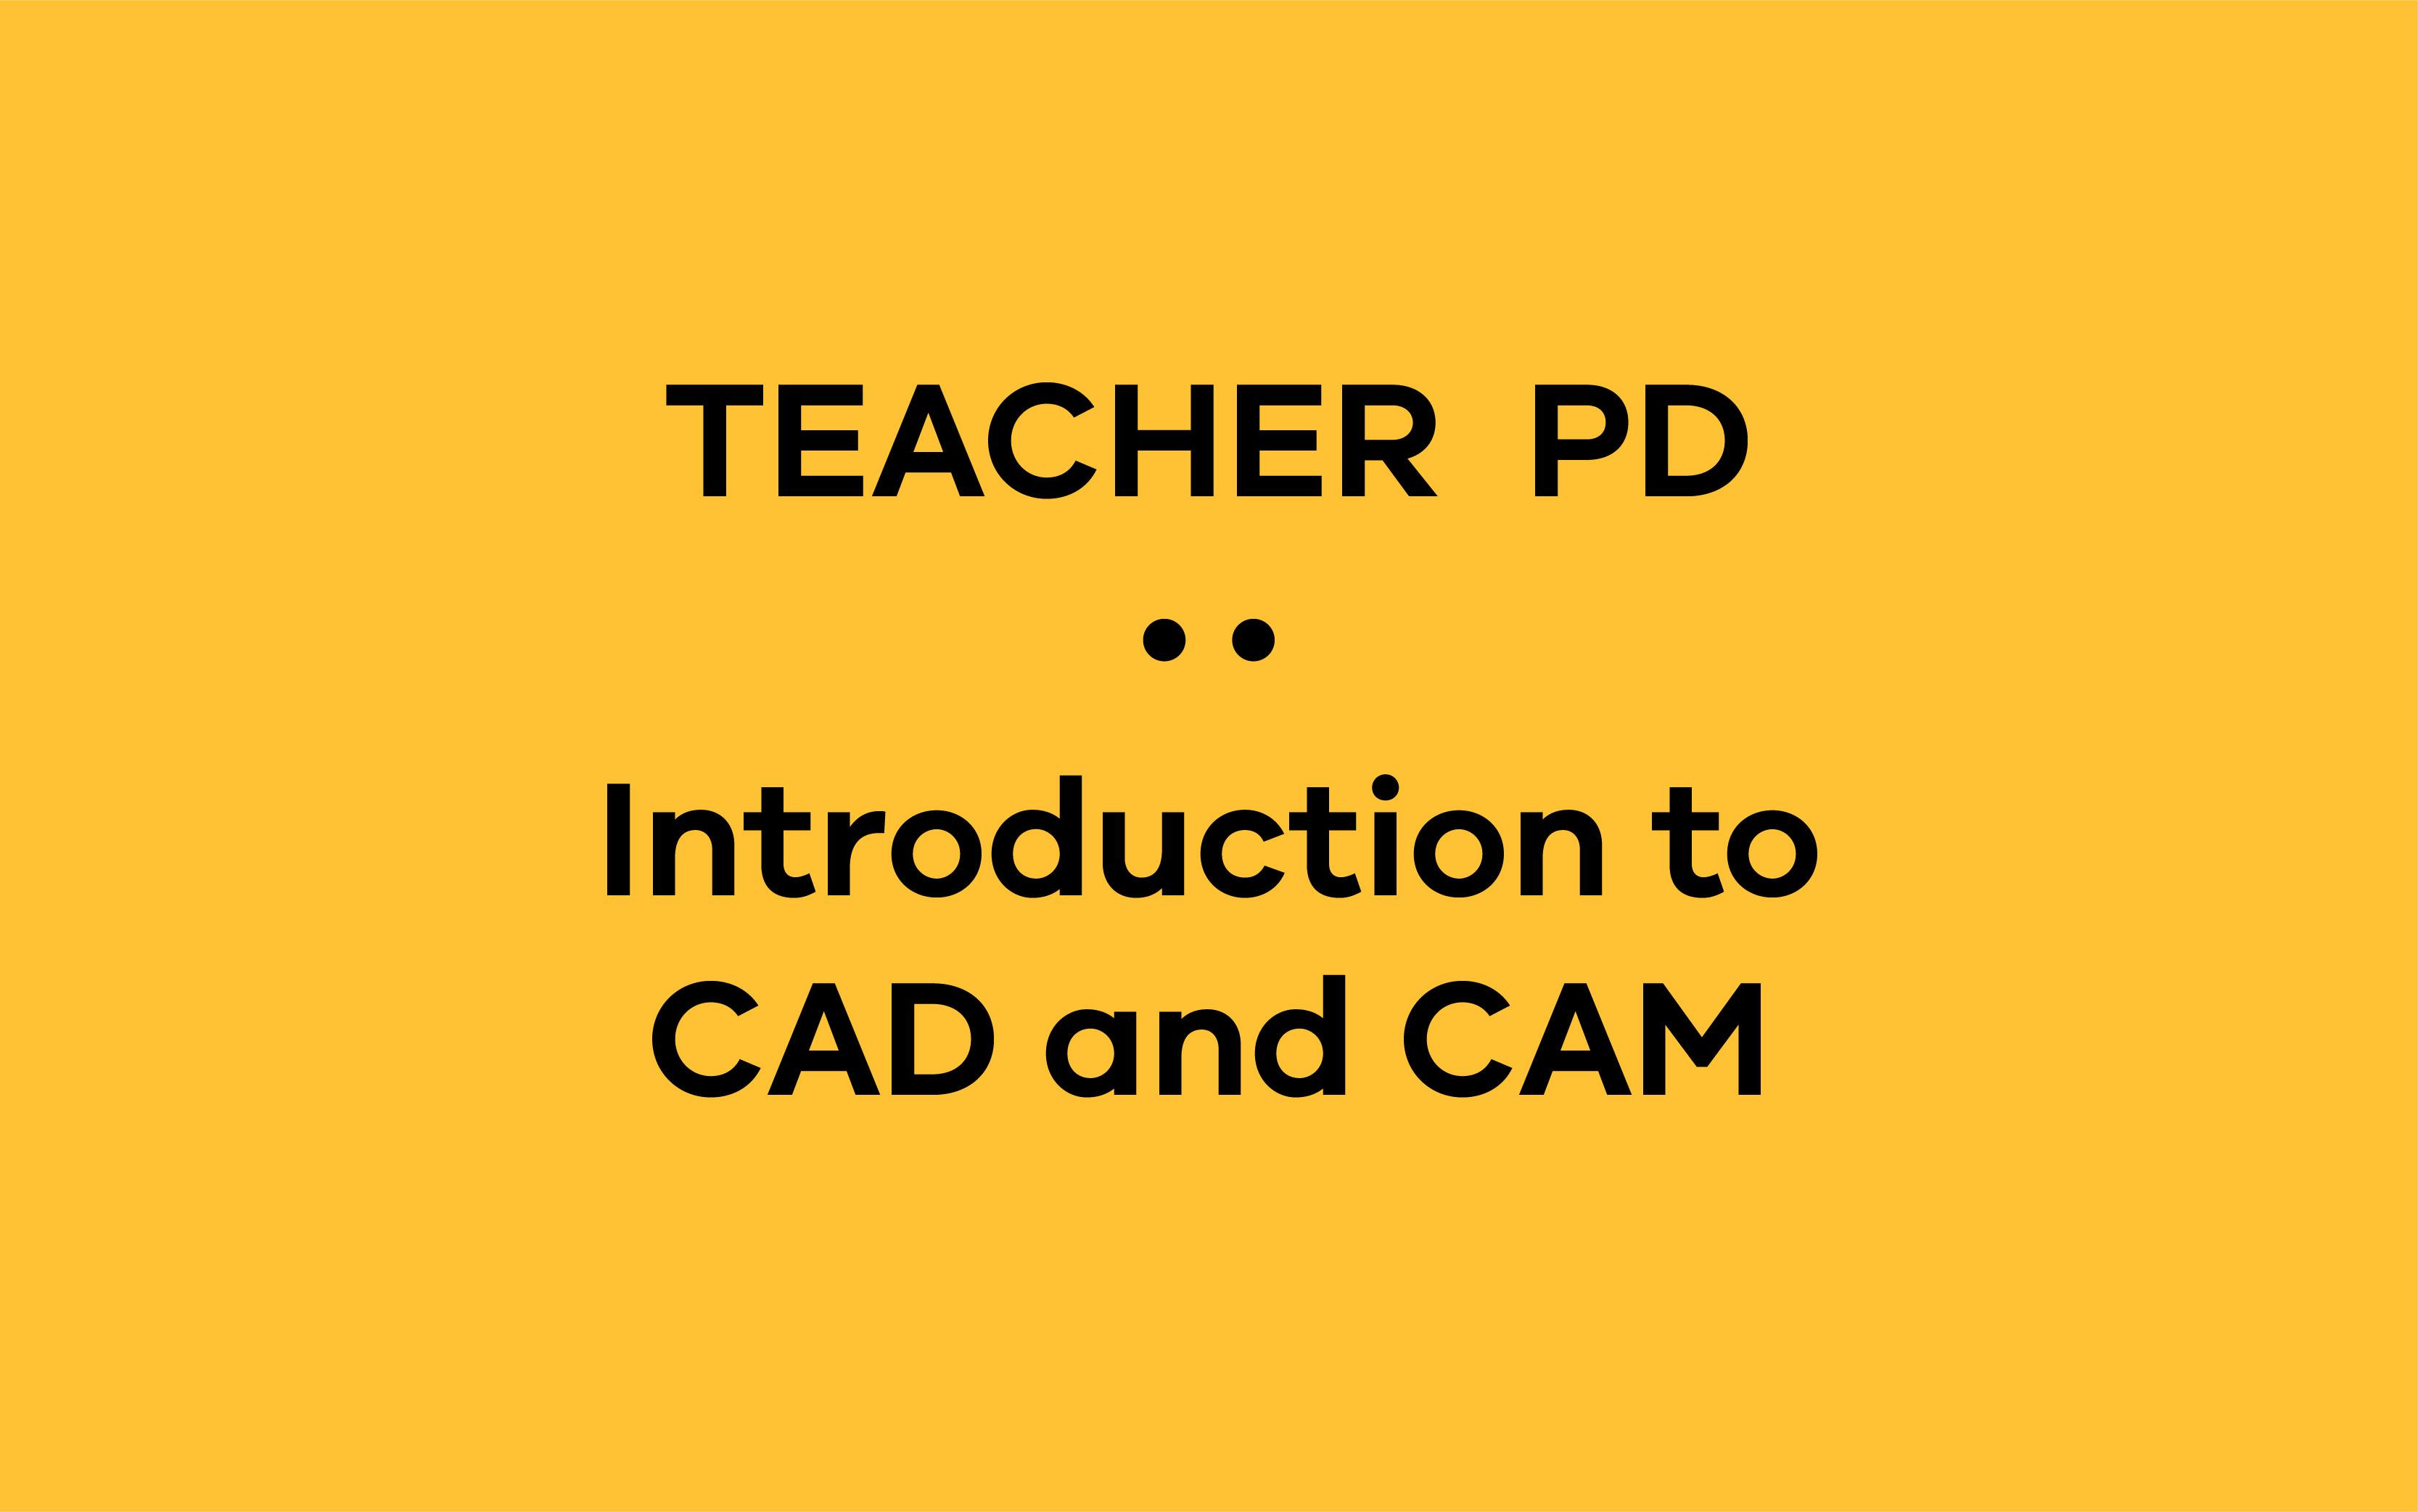 2021 - Introduction to: CAD / CAM